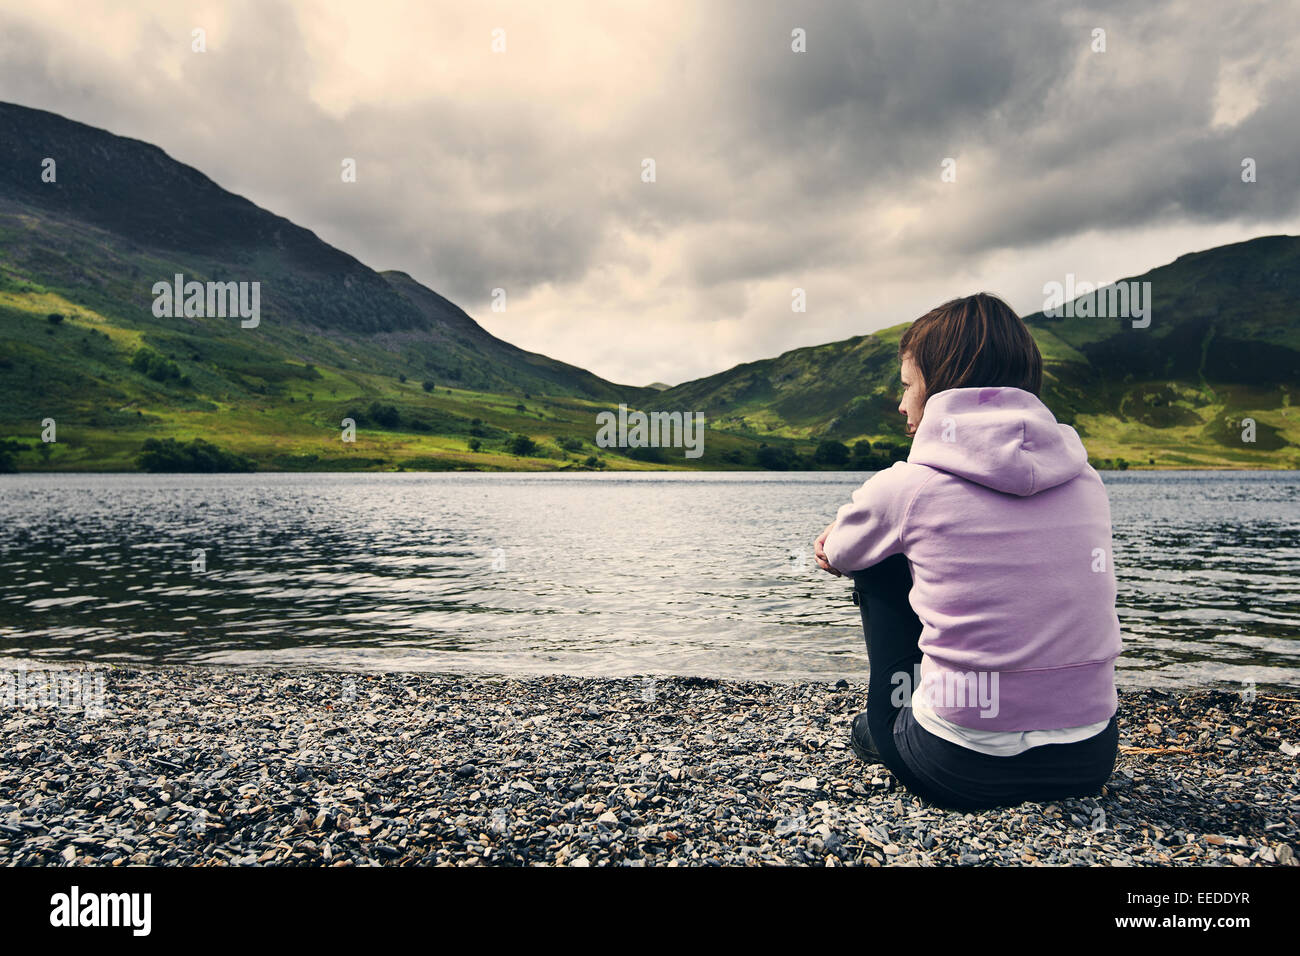 Woman by Crummock Water, Lake District. Stock Photo